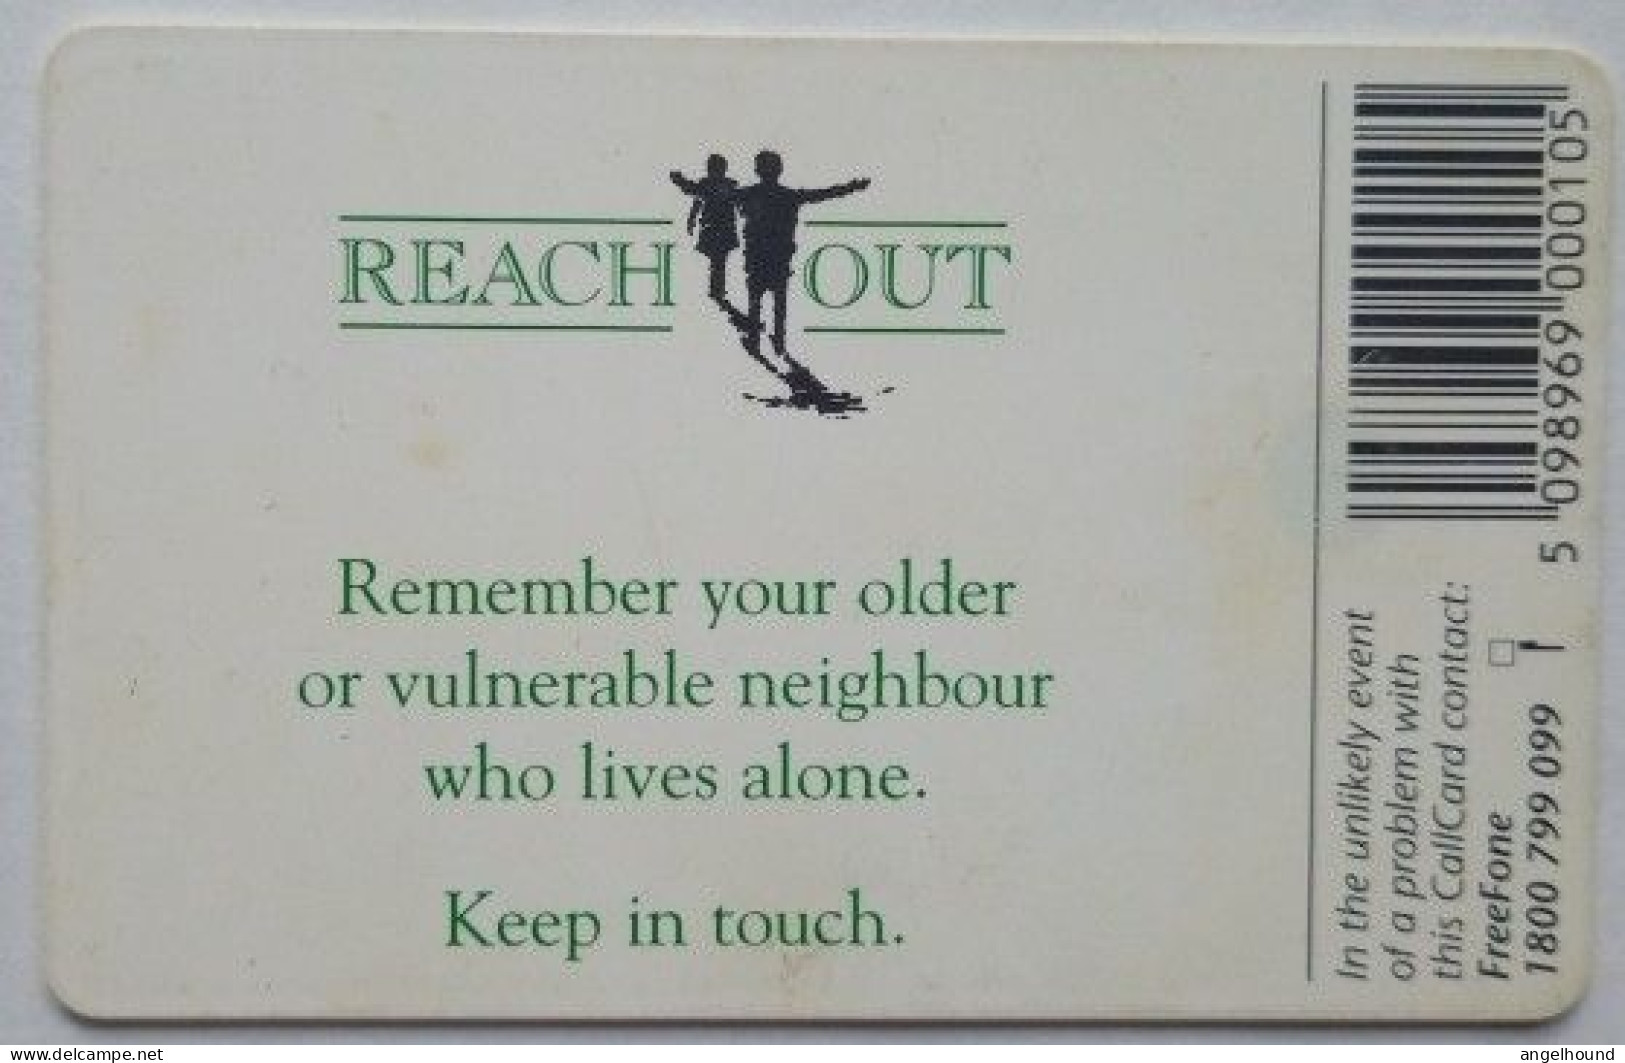 Ireland 10 Units Chip Card - Reach Out '97 - Irlande